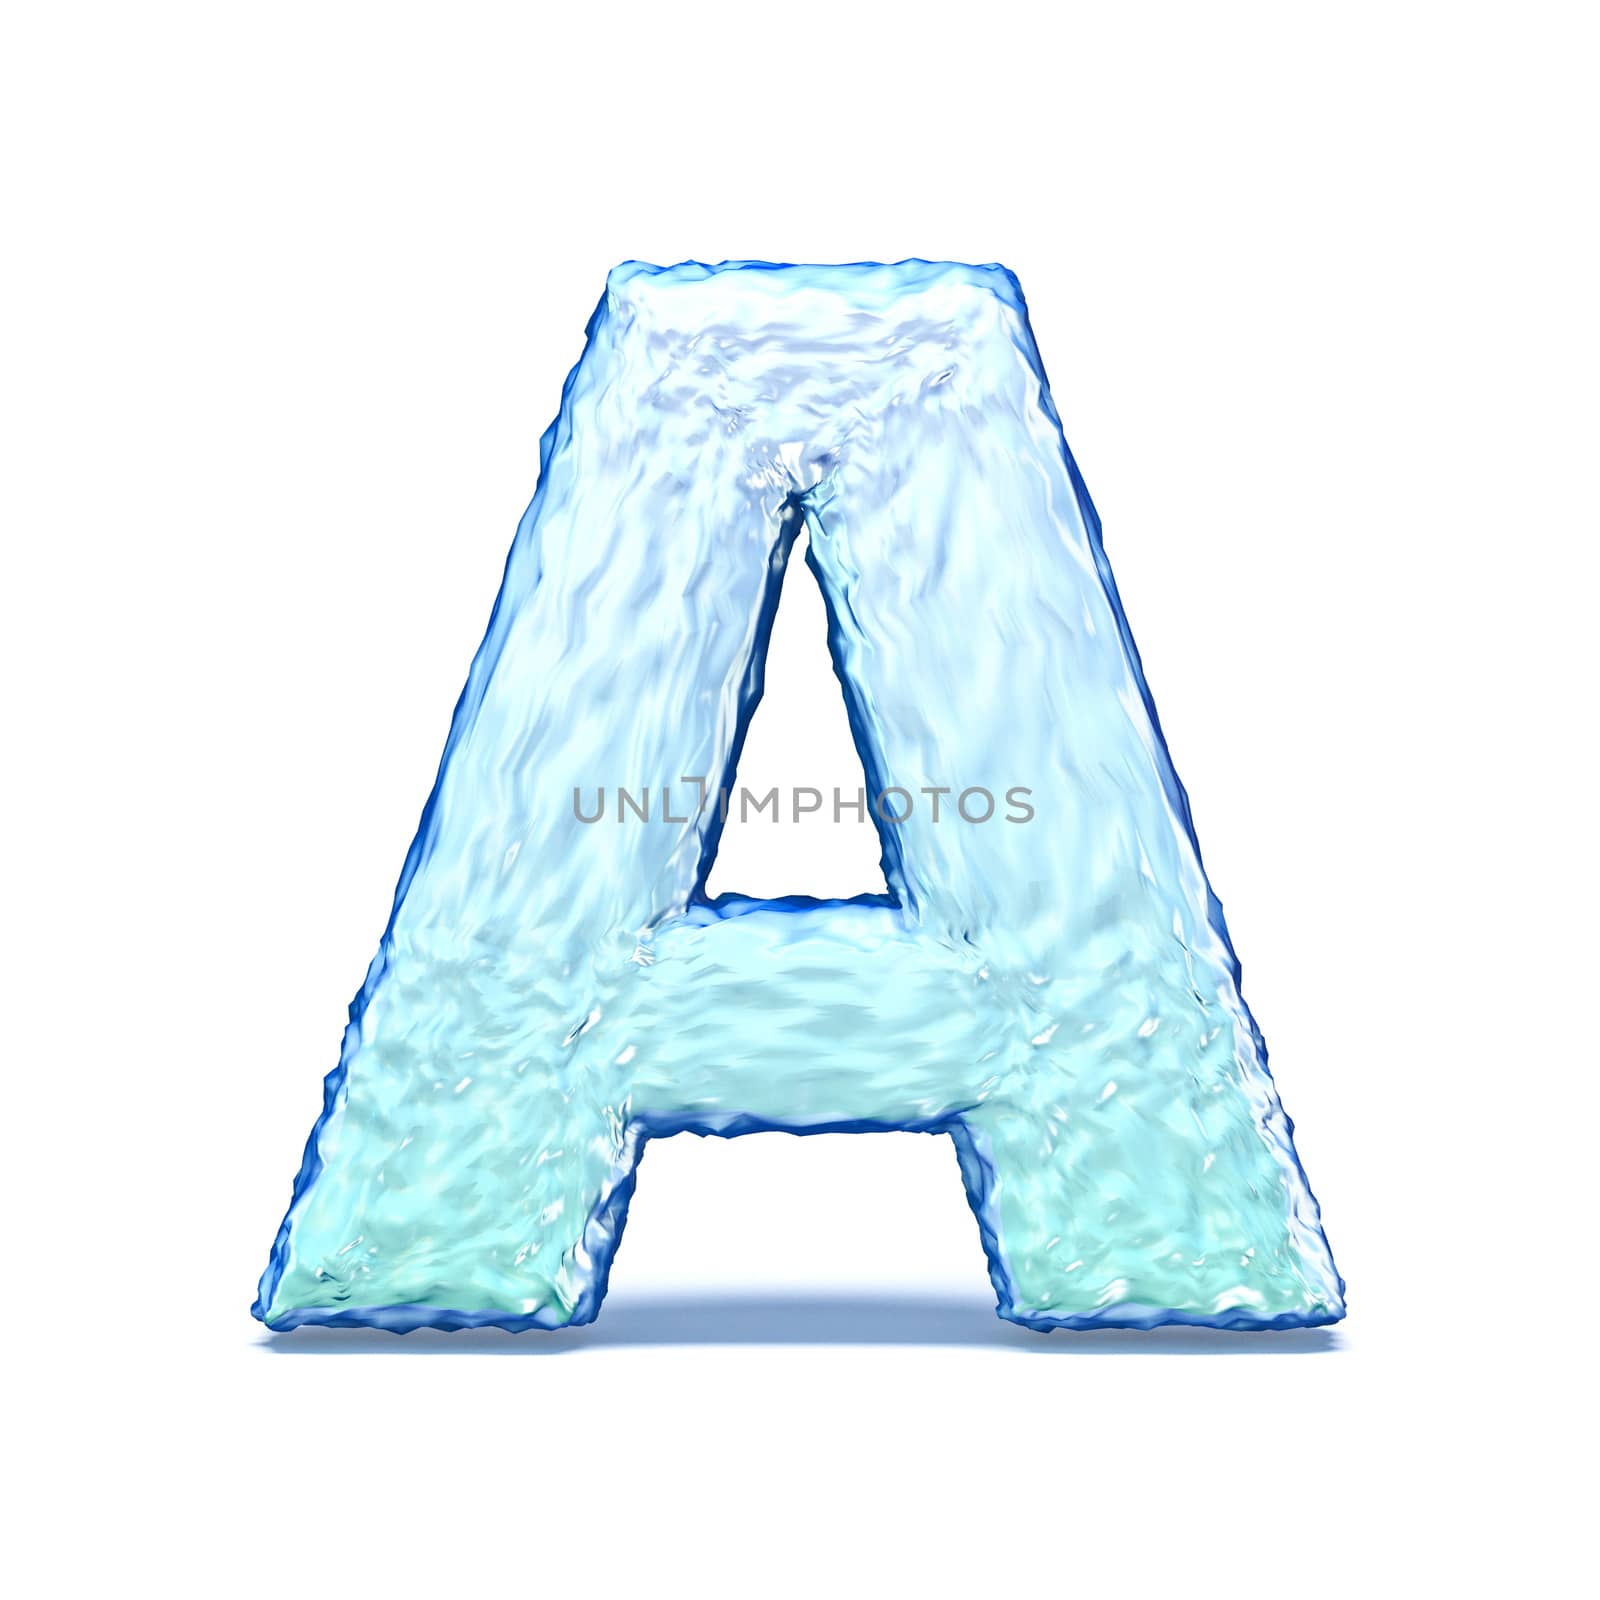 Ice crystal font letter A 3D by djmilic